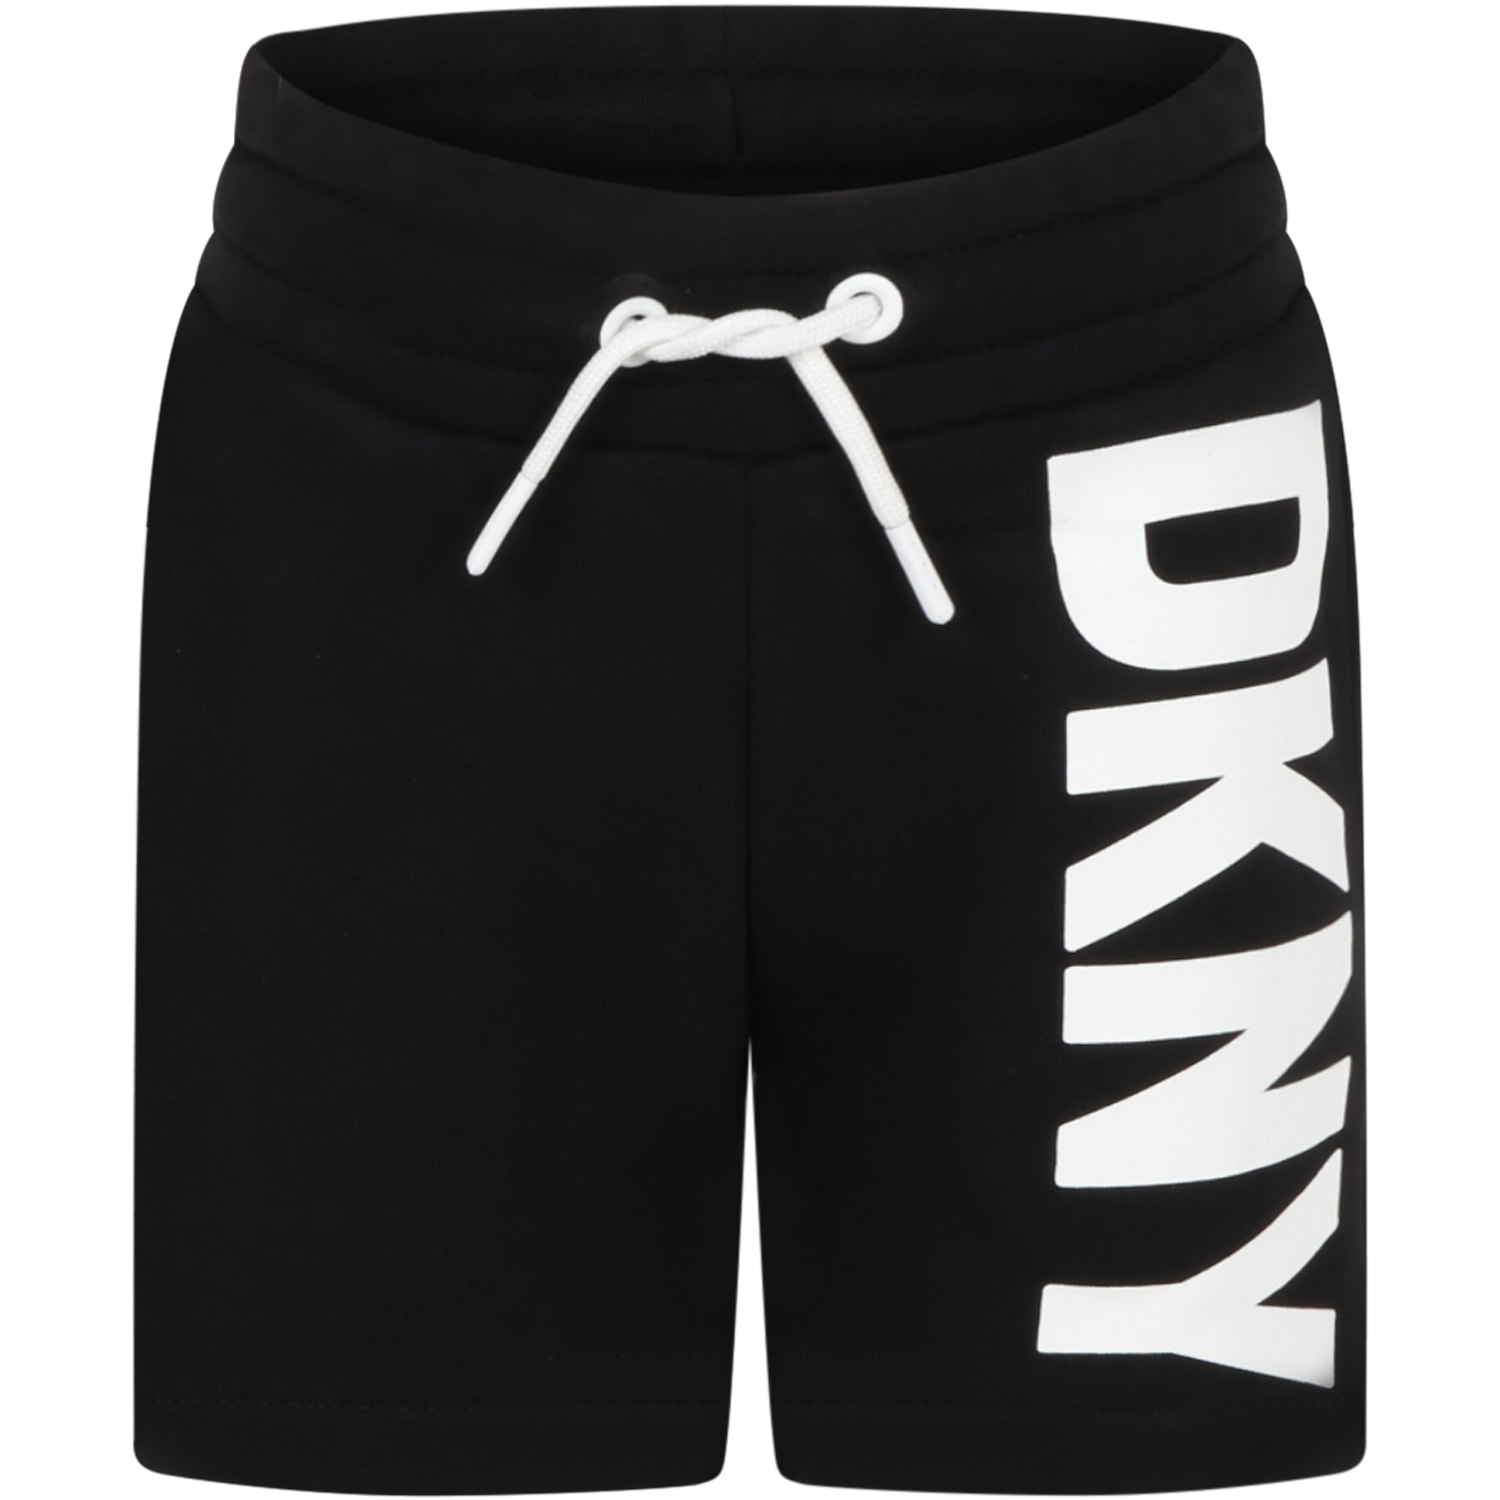 DKNY Black Shorts For Girl With White Logo